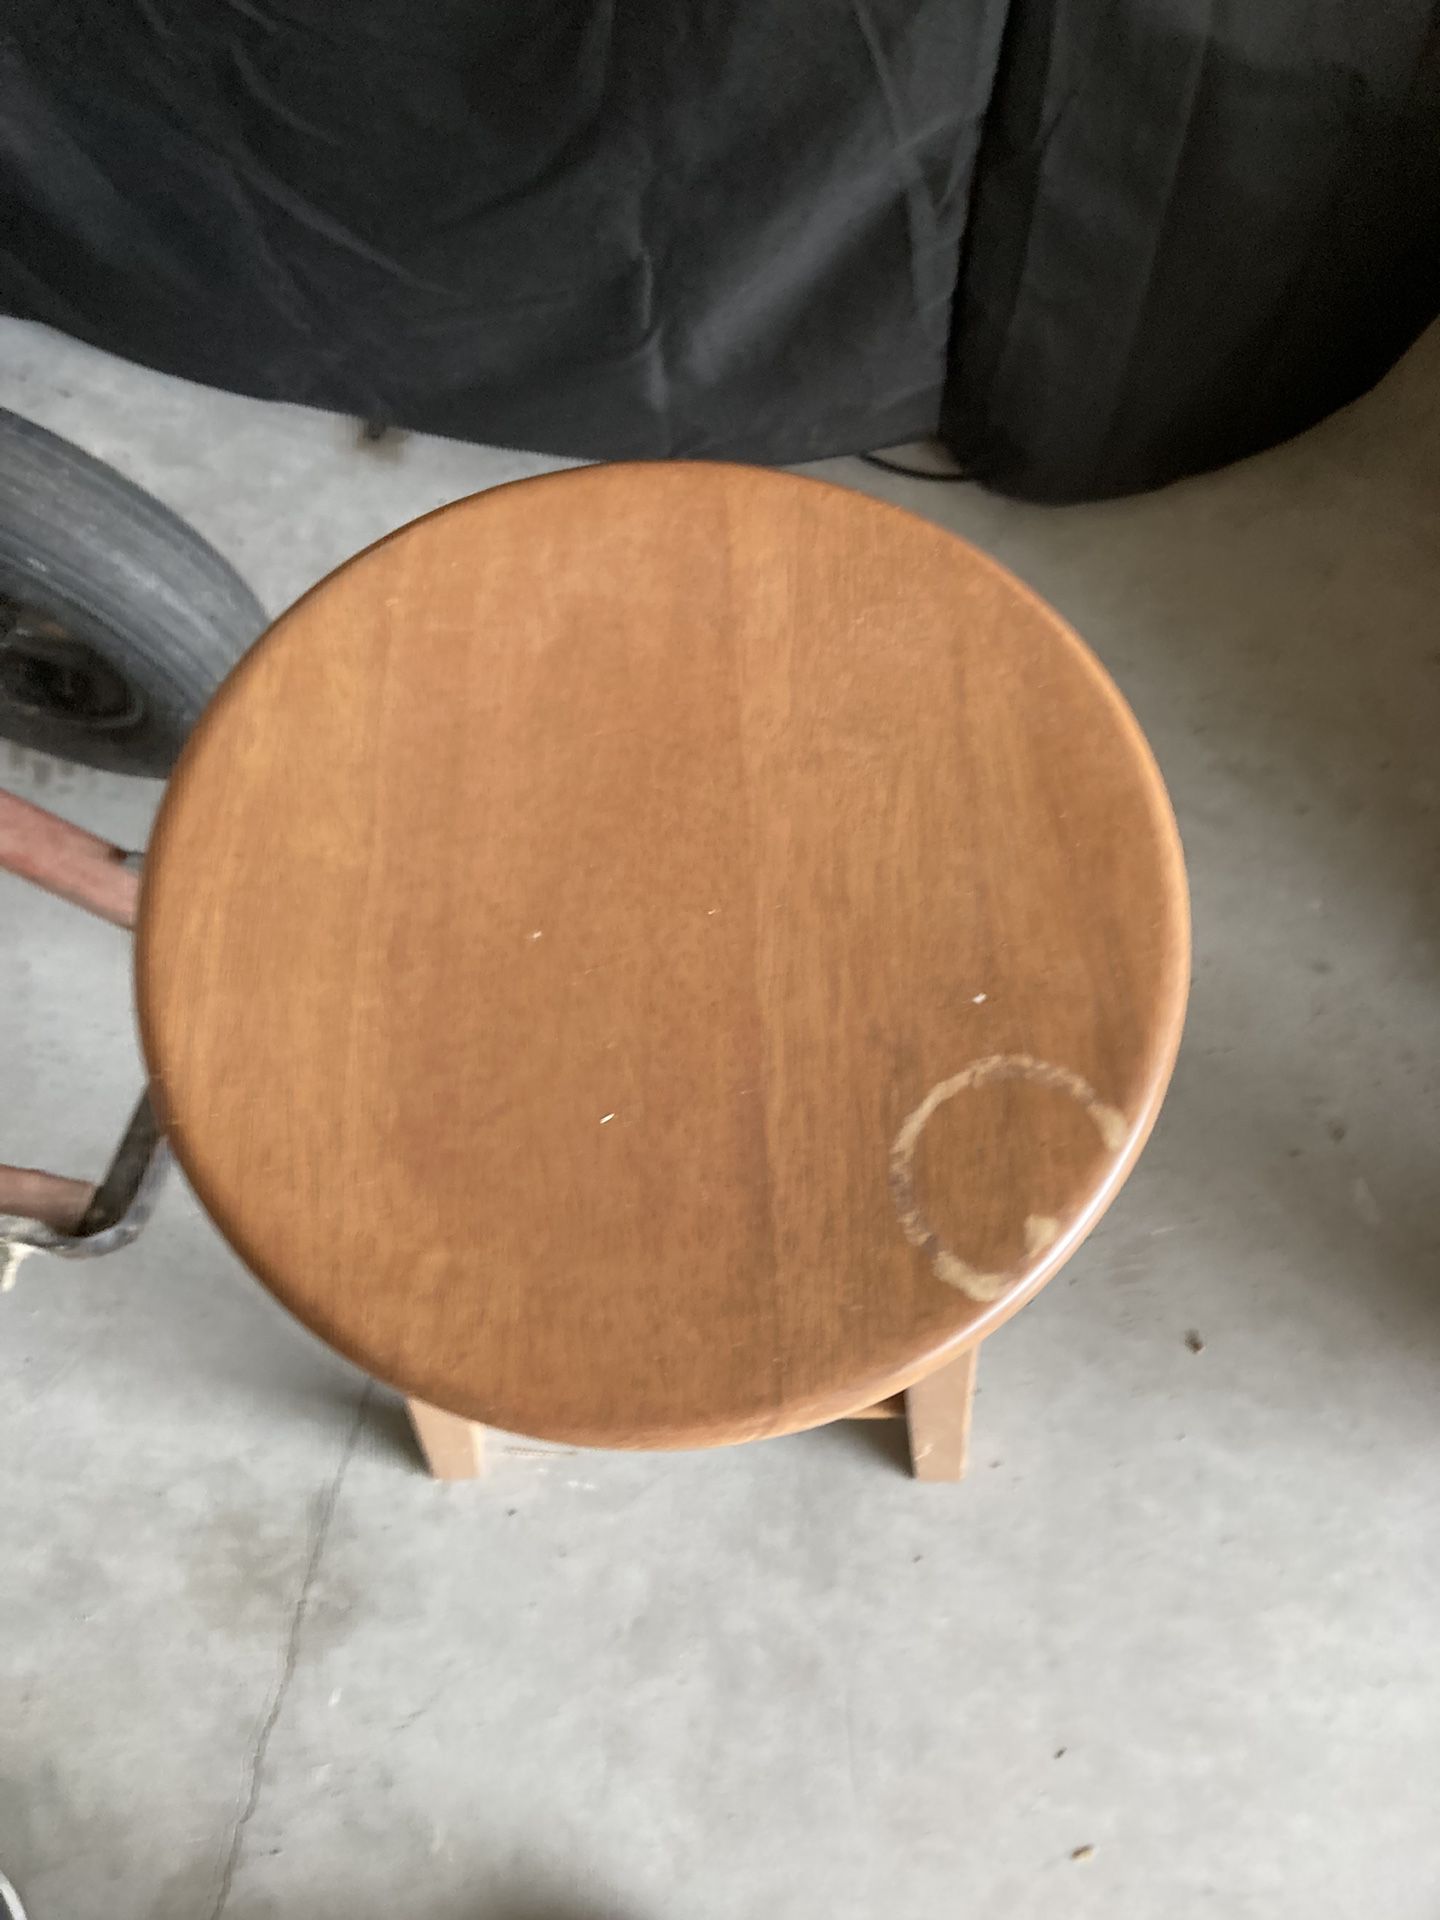 Wooden Stool Used In Activity Room